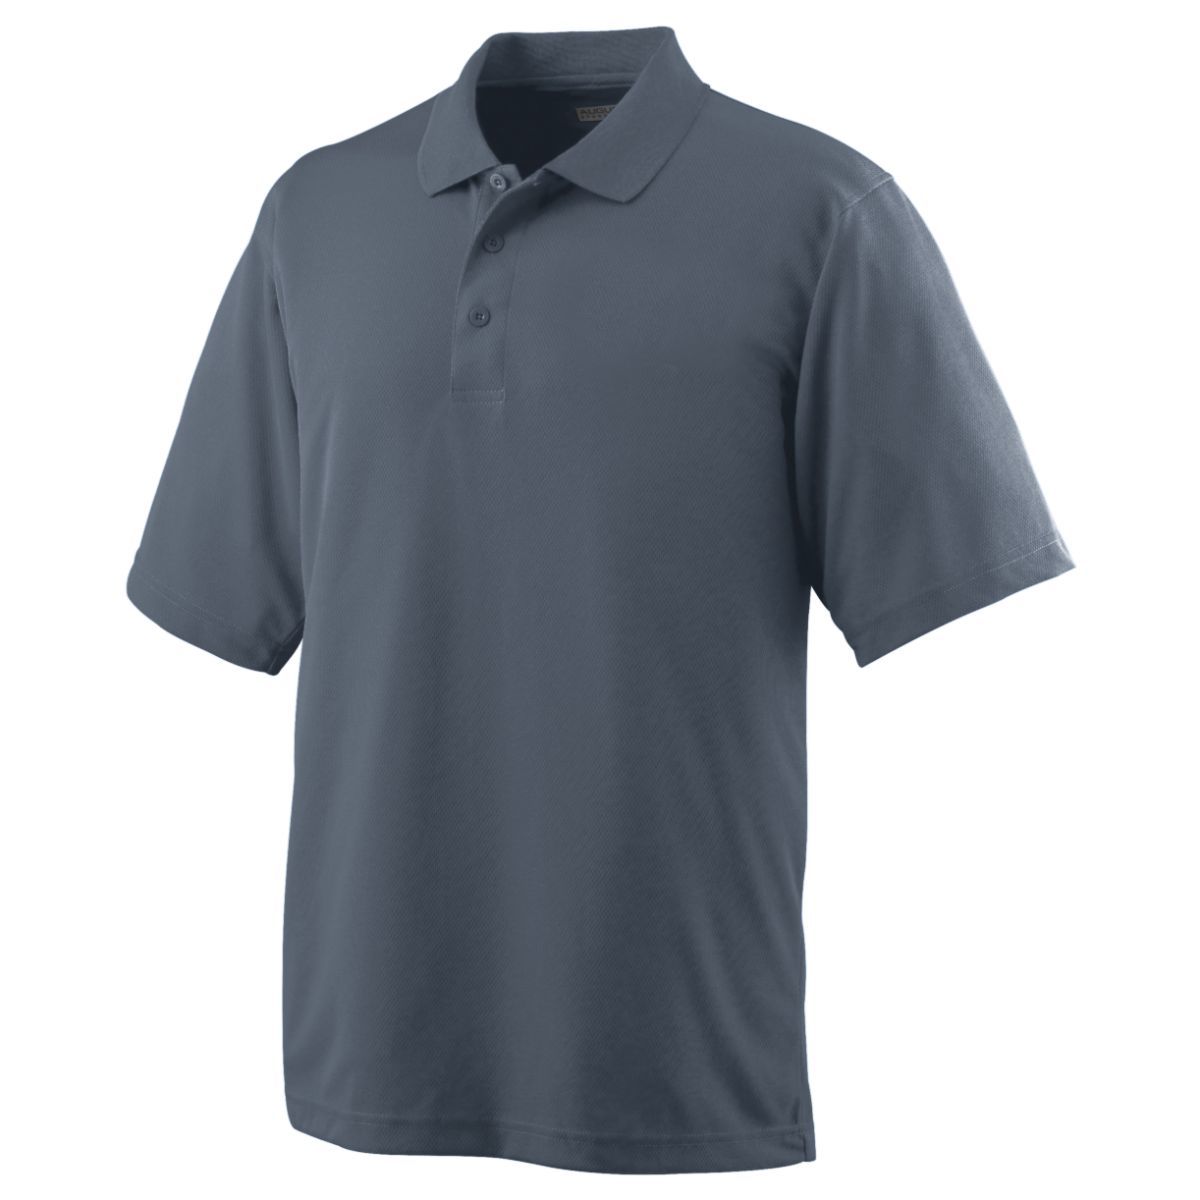 Augusta Sportswear Wicking Mesh Polo in Graphite  -Part of the Adult, Adult-Polos, Polos, Augusta-Products, Tennis, Shirts product lines at KanaleyCreations.com